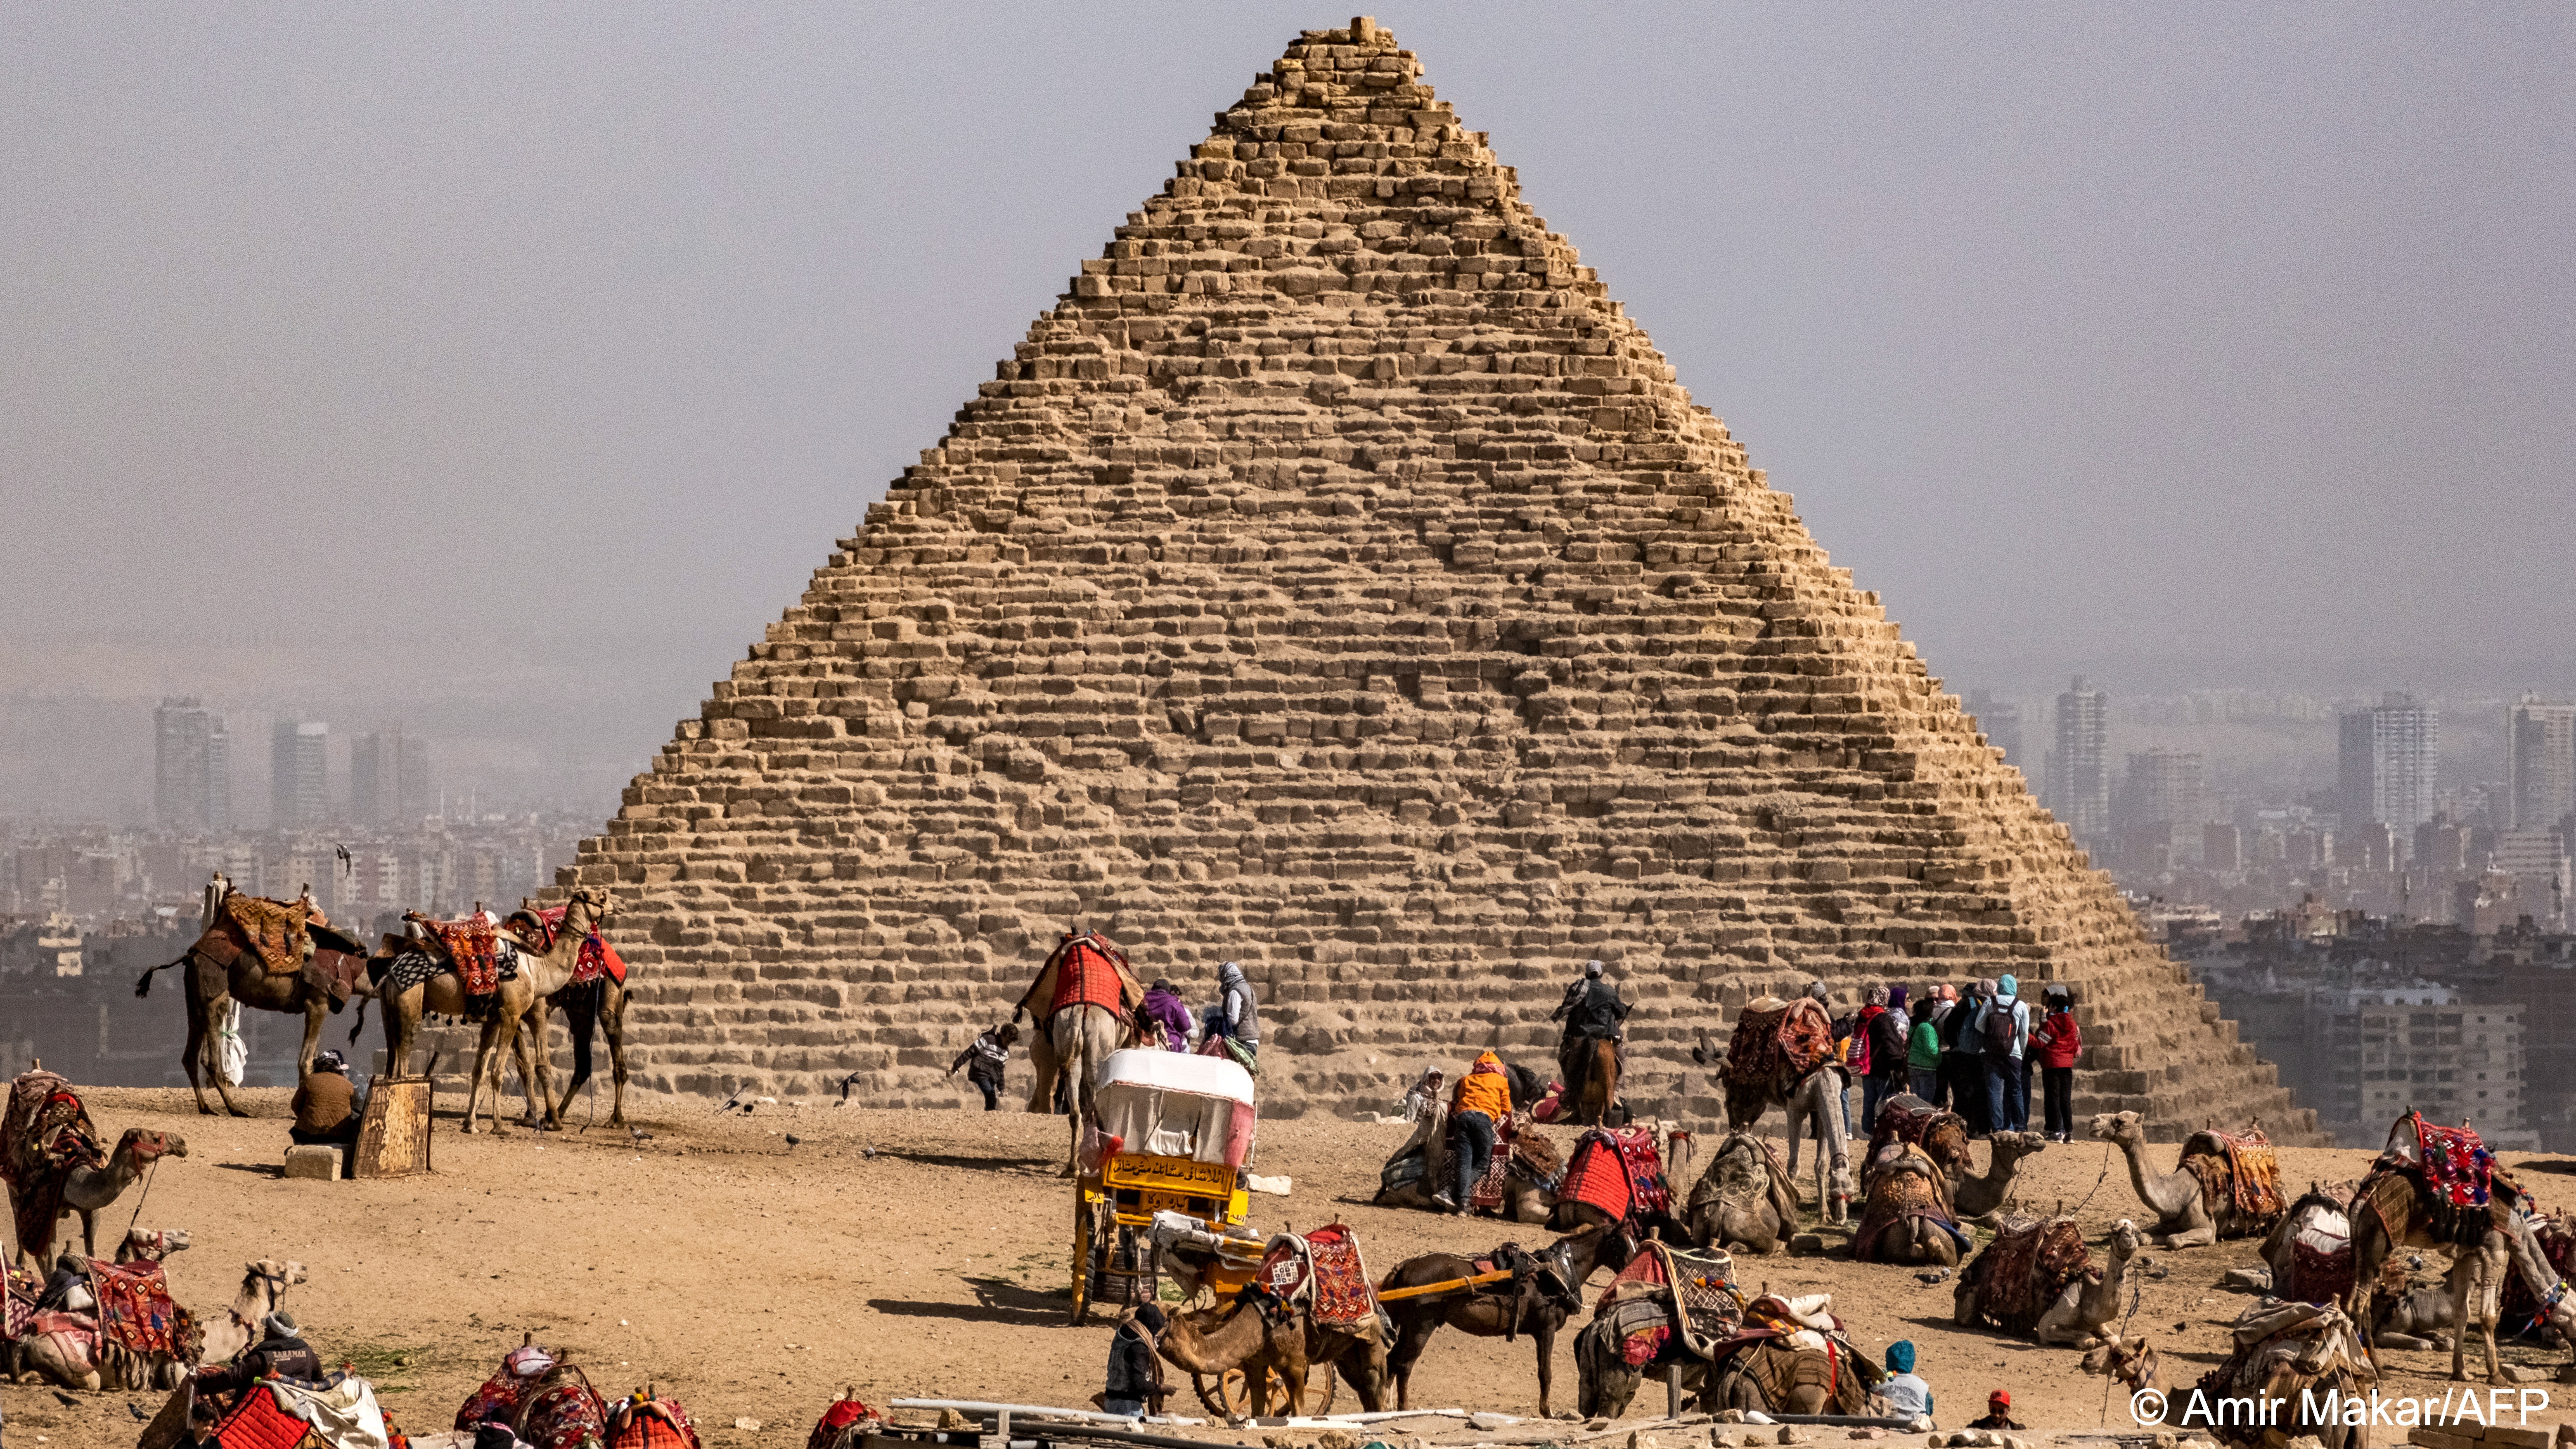 Menkaure pyramid, pictured in February 2023, was originally encased in granite but over time lost part of its covering